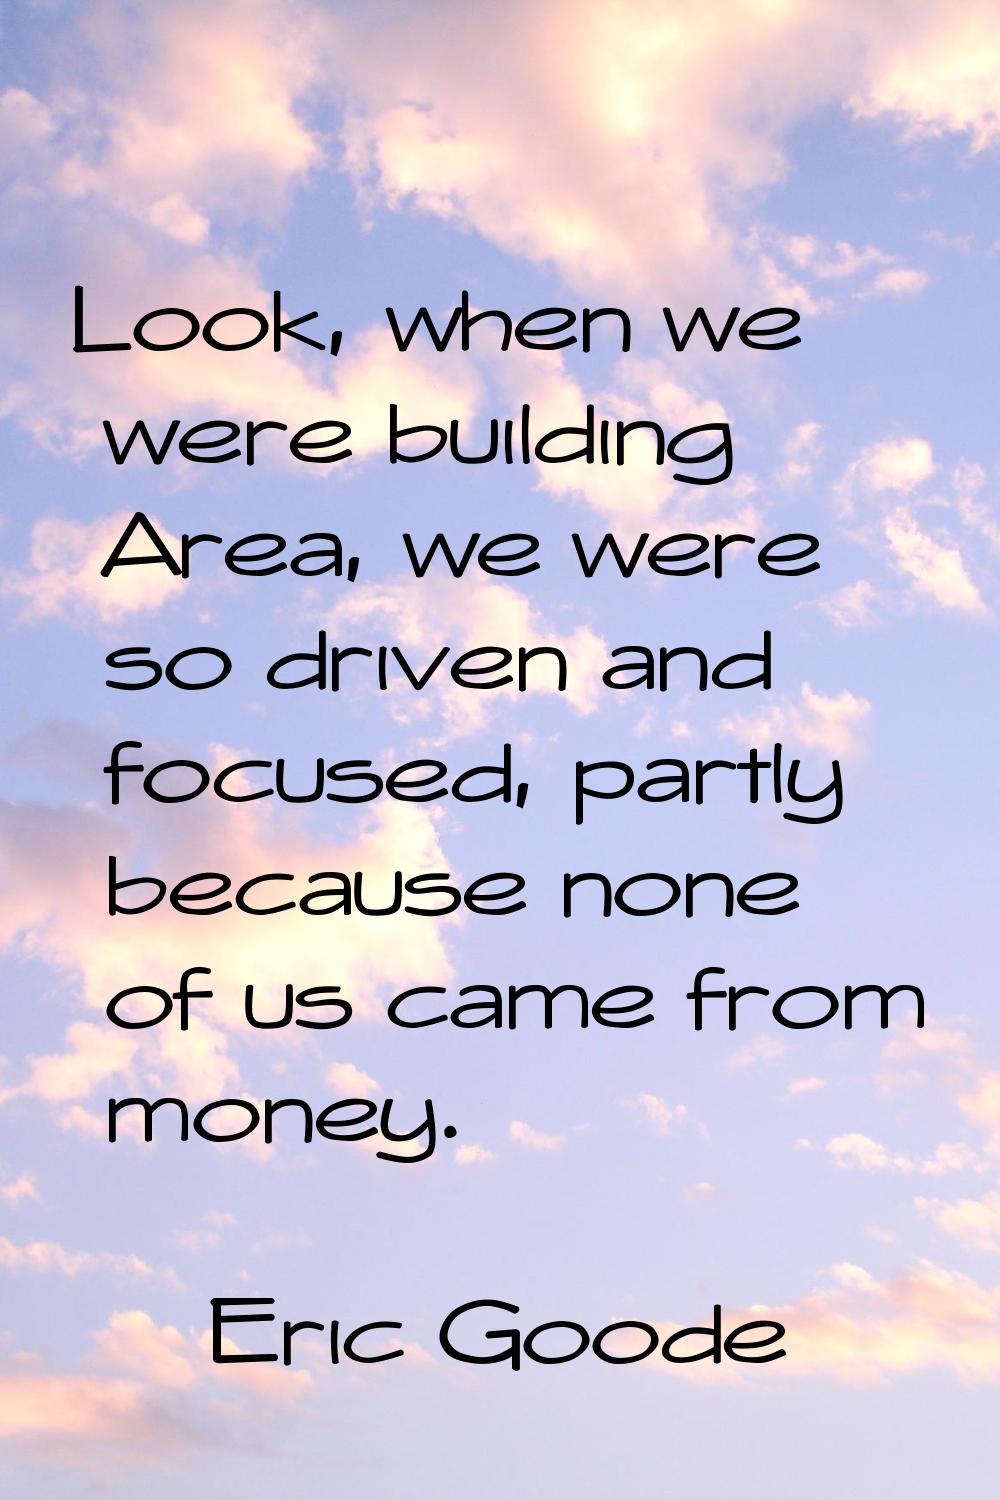 Look, when we were building Area, we were so driven and focused, partly because none of us came fro